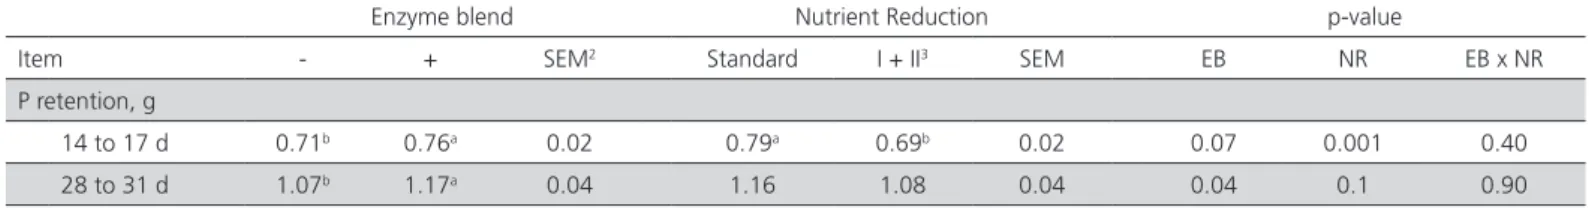 Table 5 – Effects of an enzyme blend (EB) supplementation and nutrient reduction (NR) on P retention of broiler chickens 1